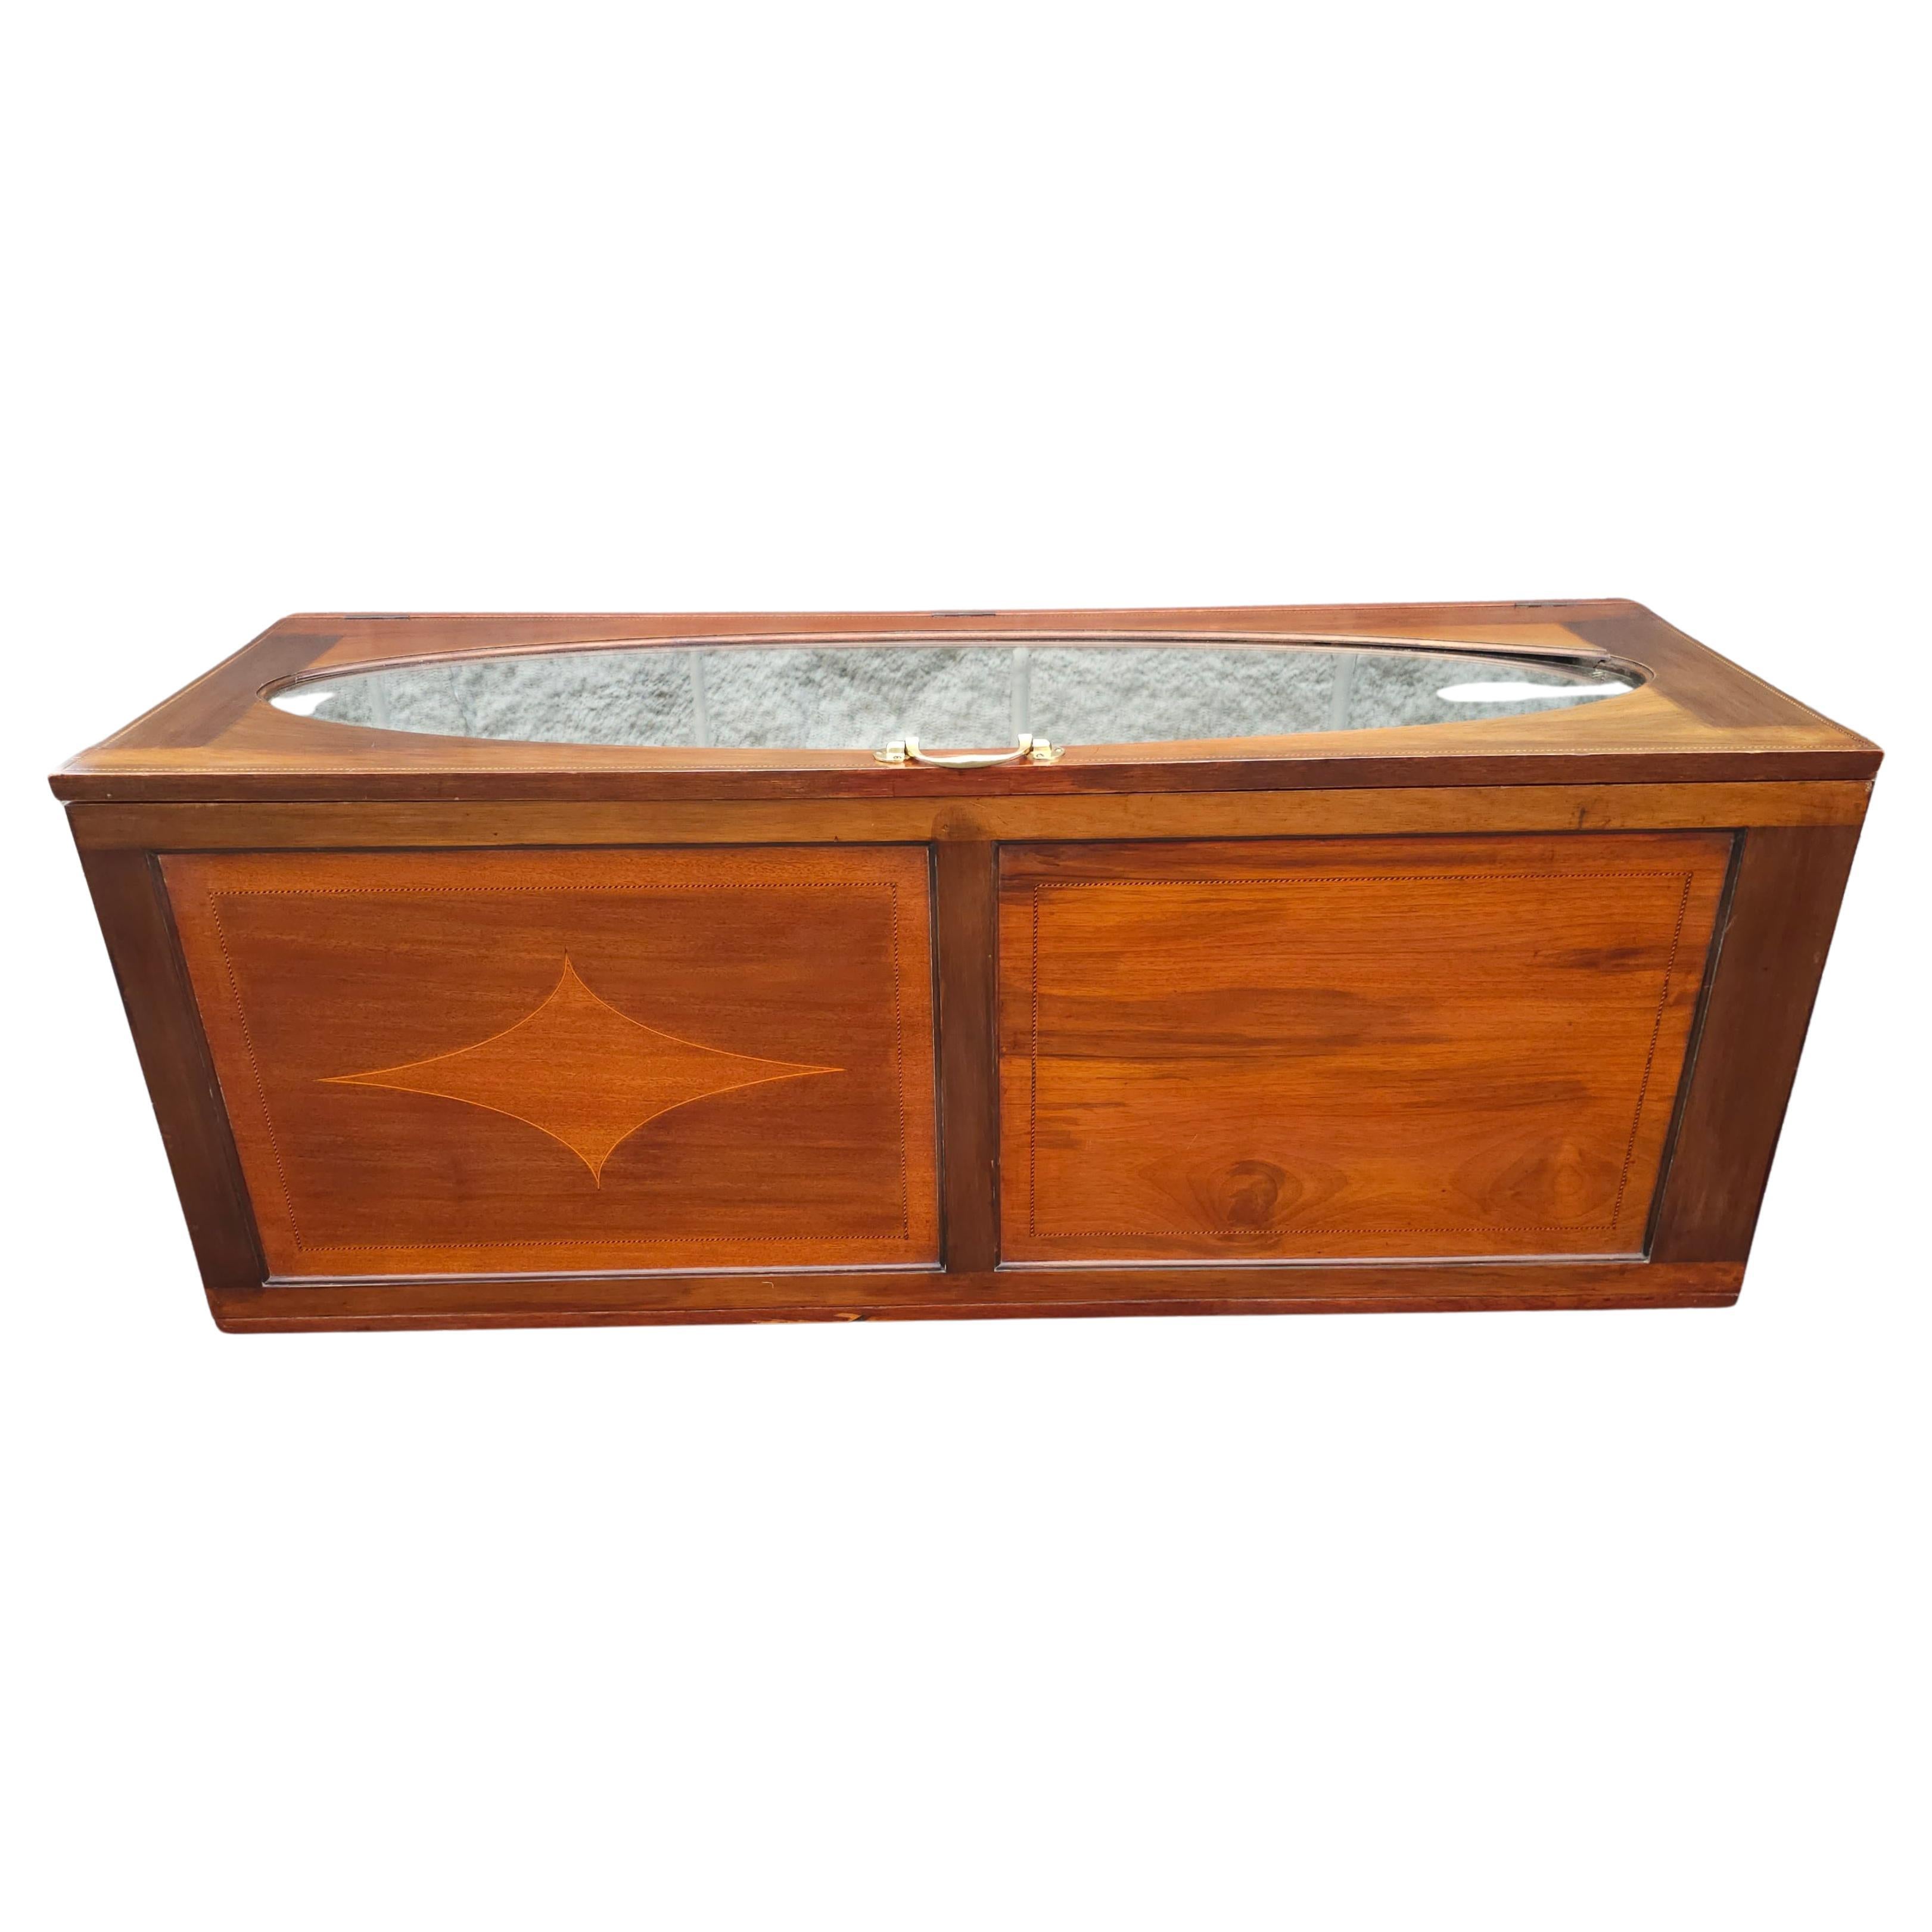 19th C. English Mahogany Marquetry Inlaid & Mirrored Top Blanket Chest on Wheels For Sale